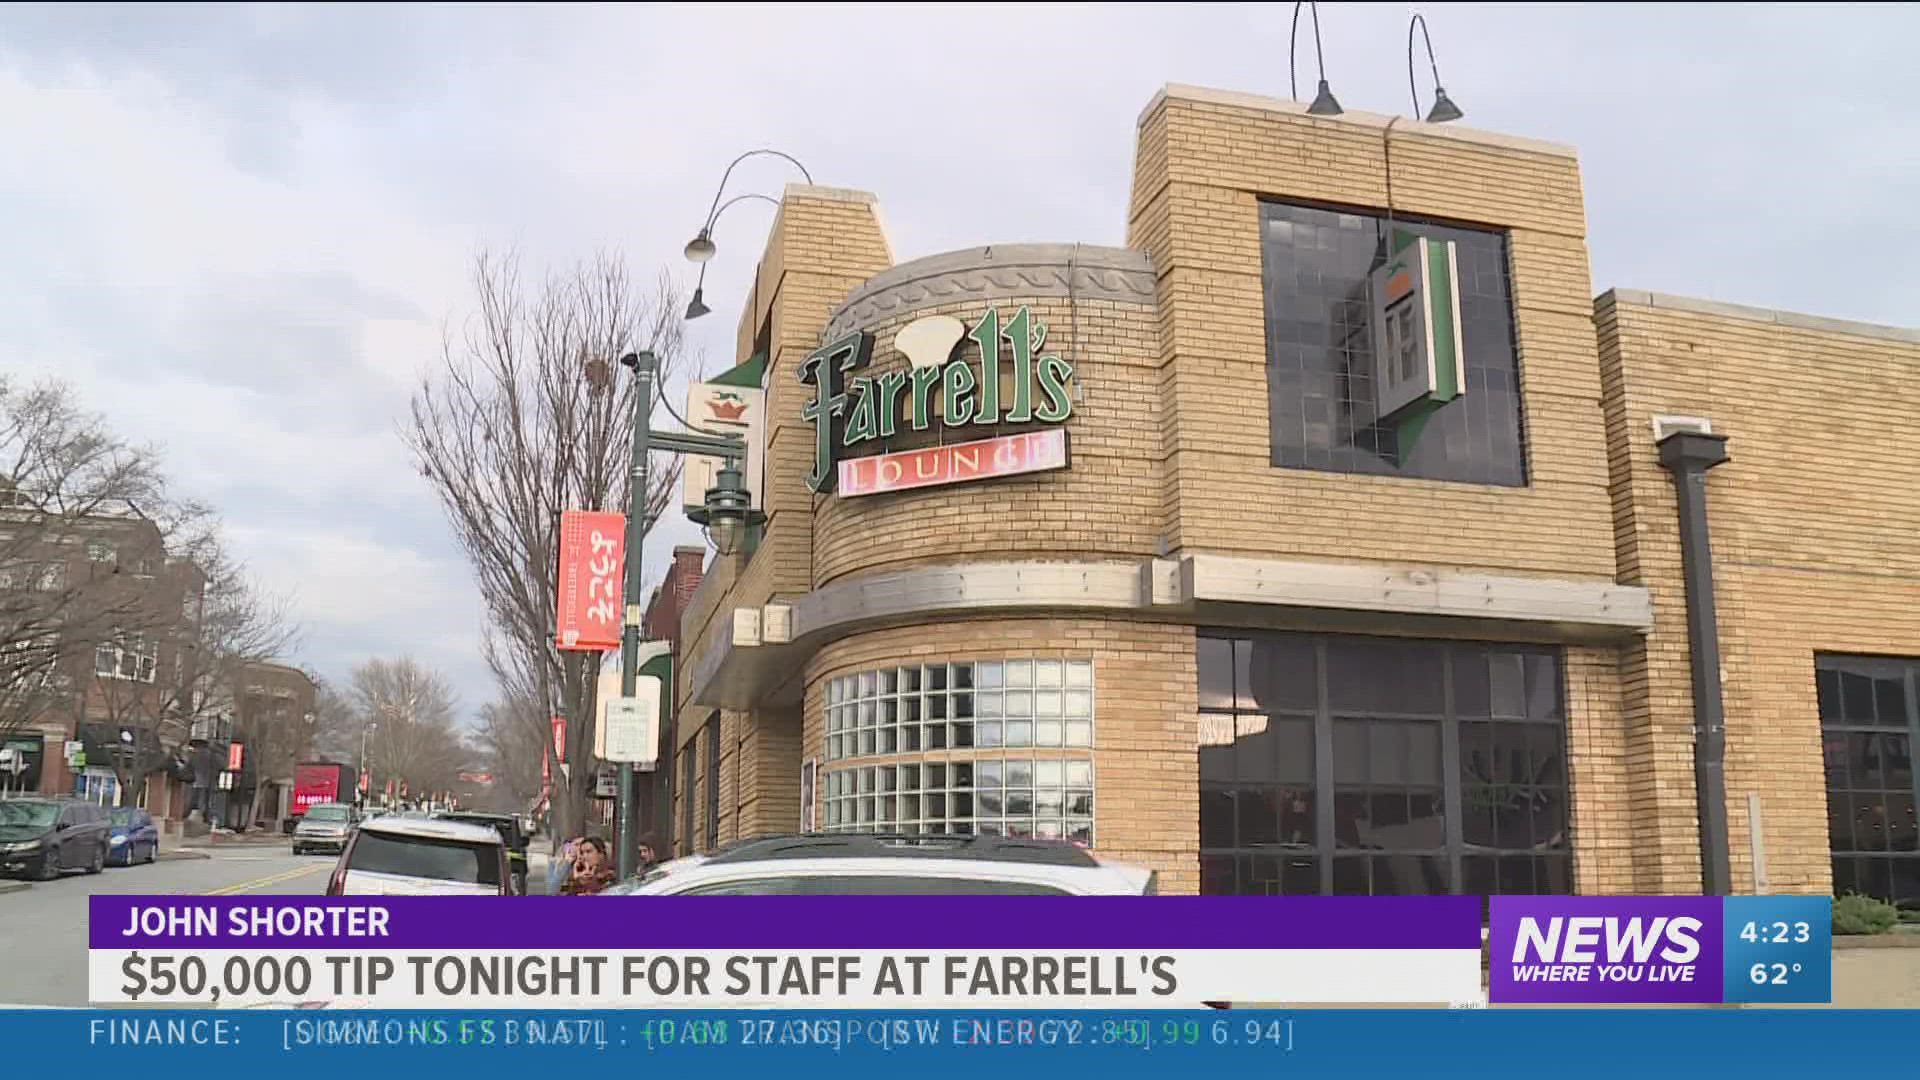 Workers at Farrell's Lounge on Dickson Street received a $50,000 tip from Ally Bank during halftime of the Arkansas Sweet 16 game.